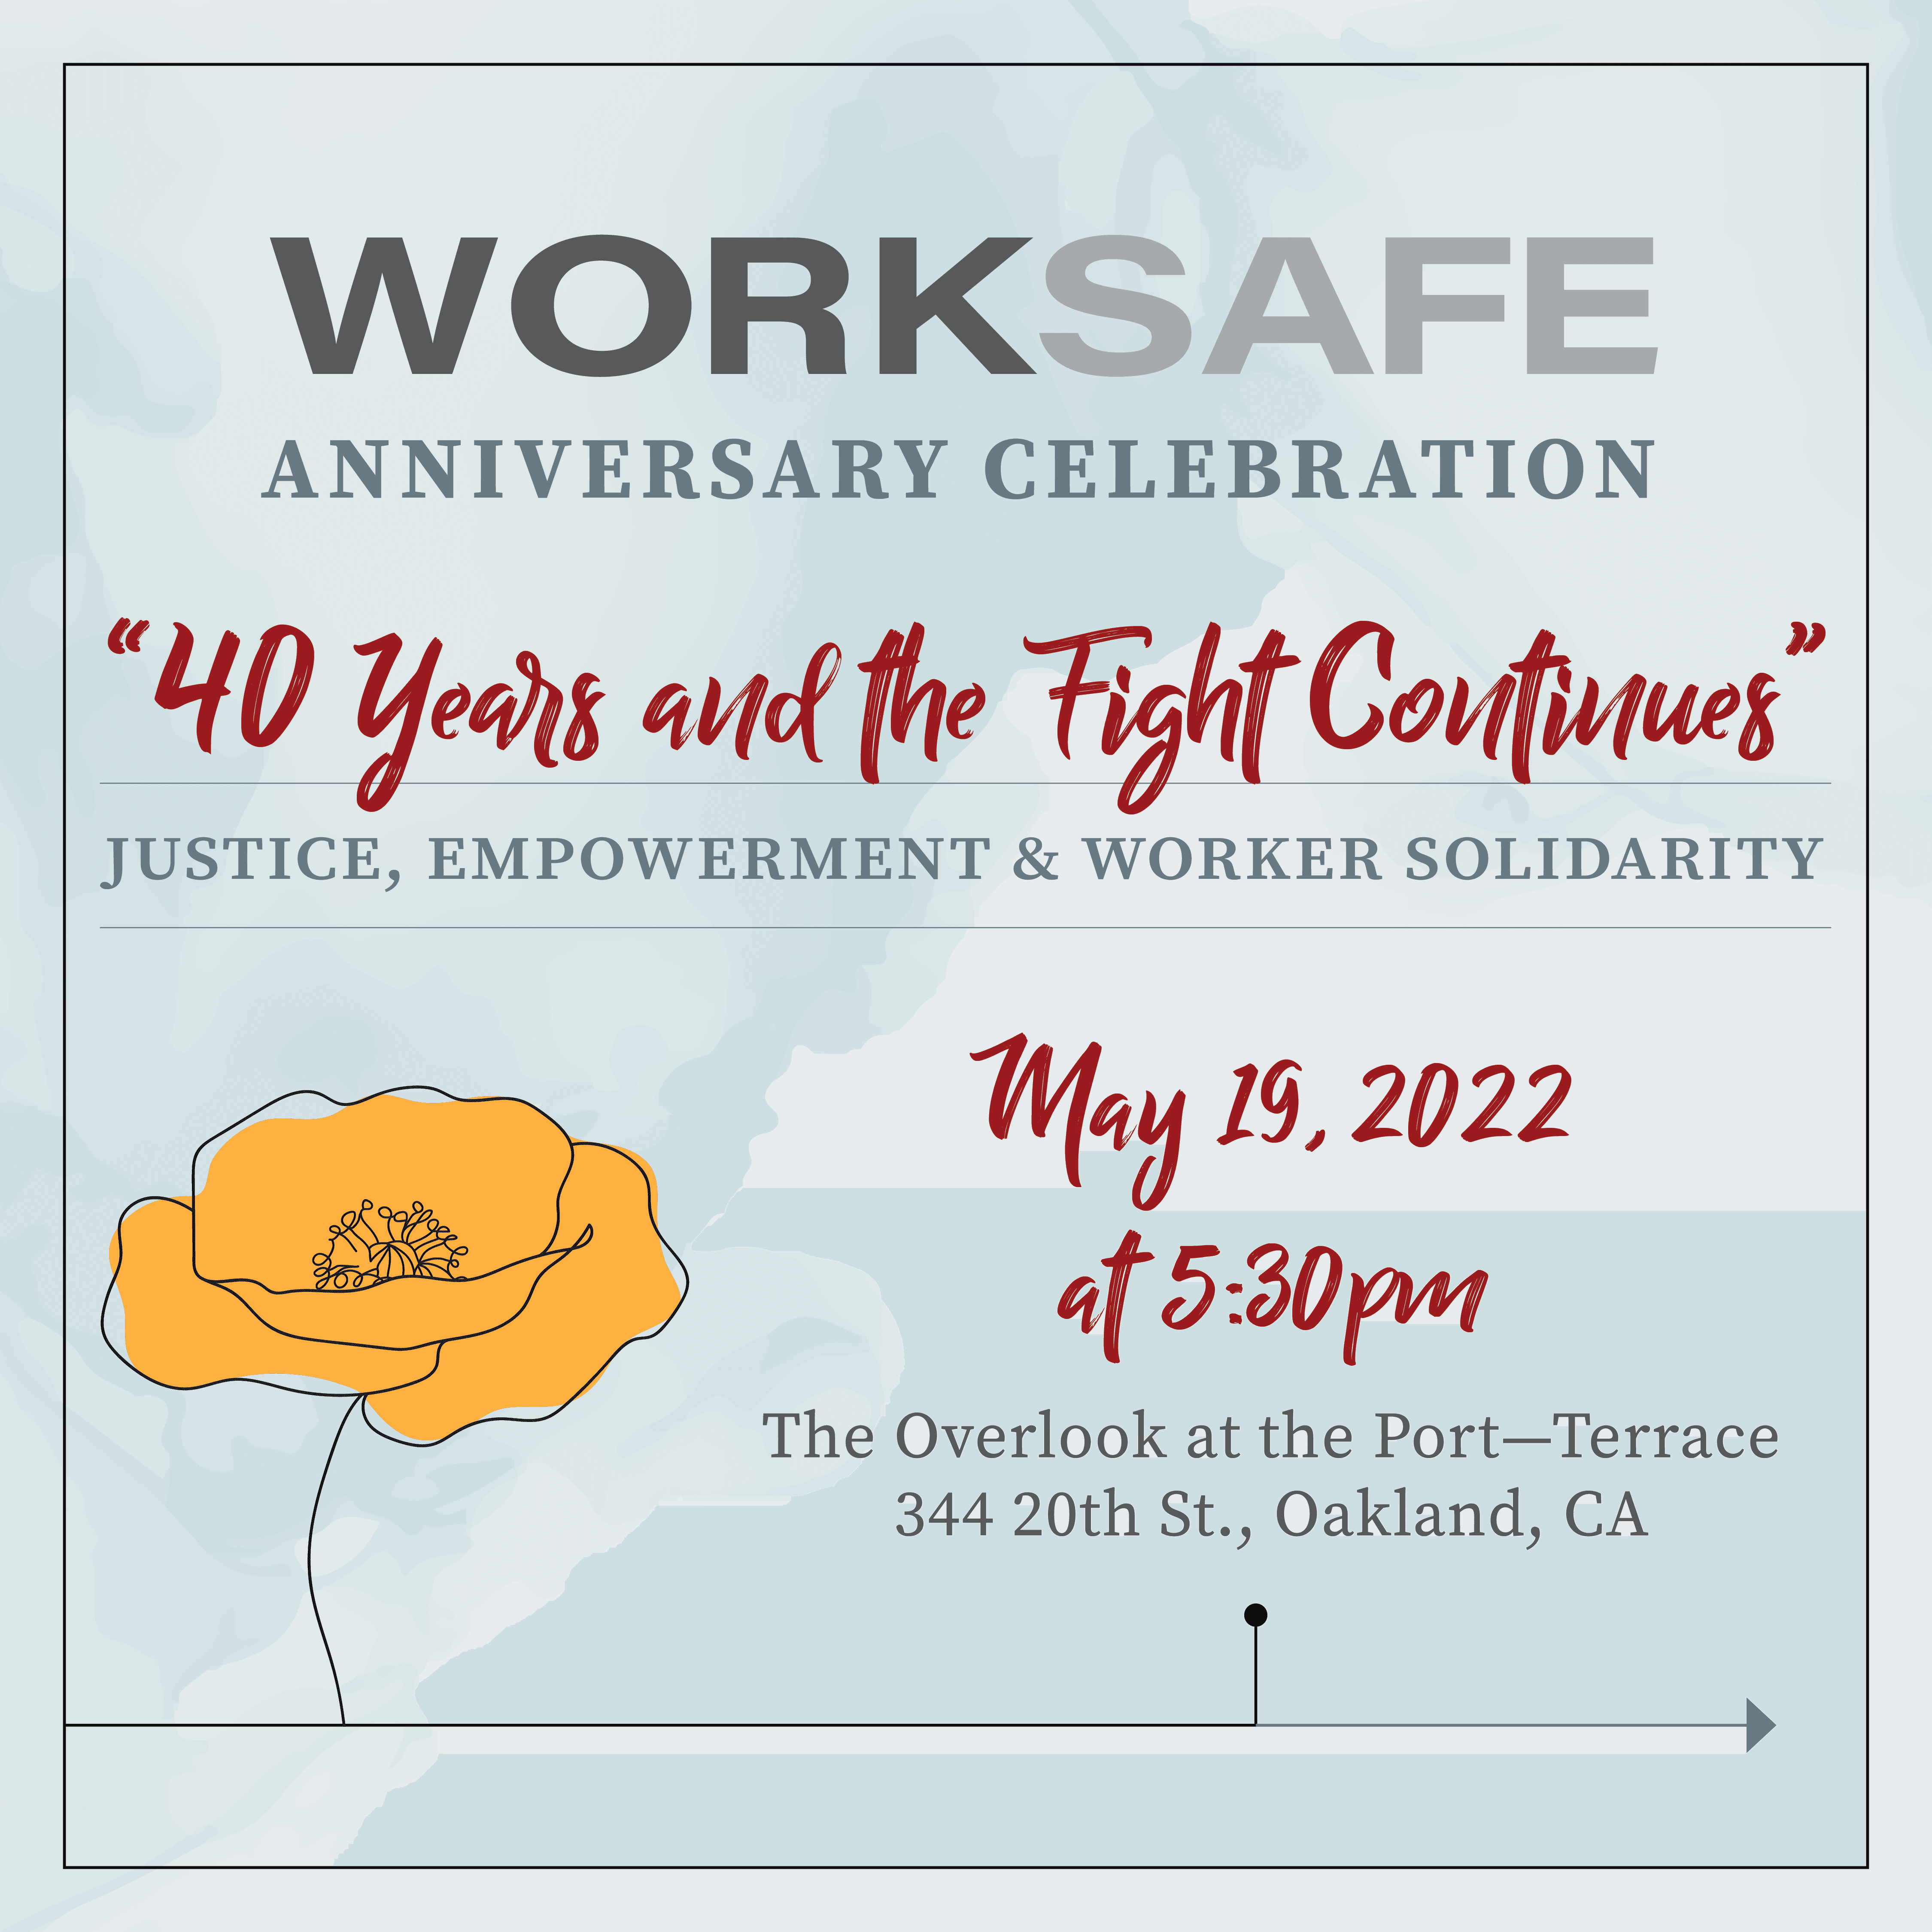 May 19, 2022 - Worksafe's 40th Anniversary Event